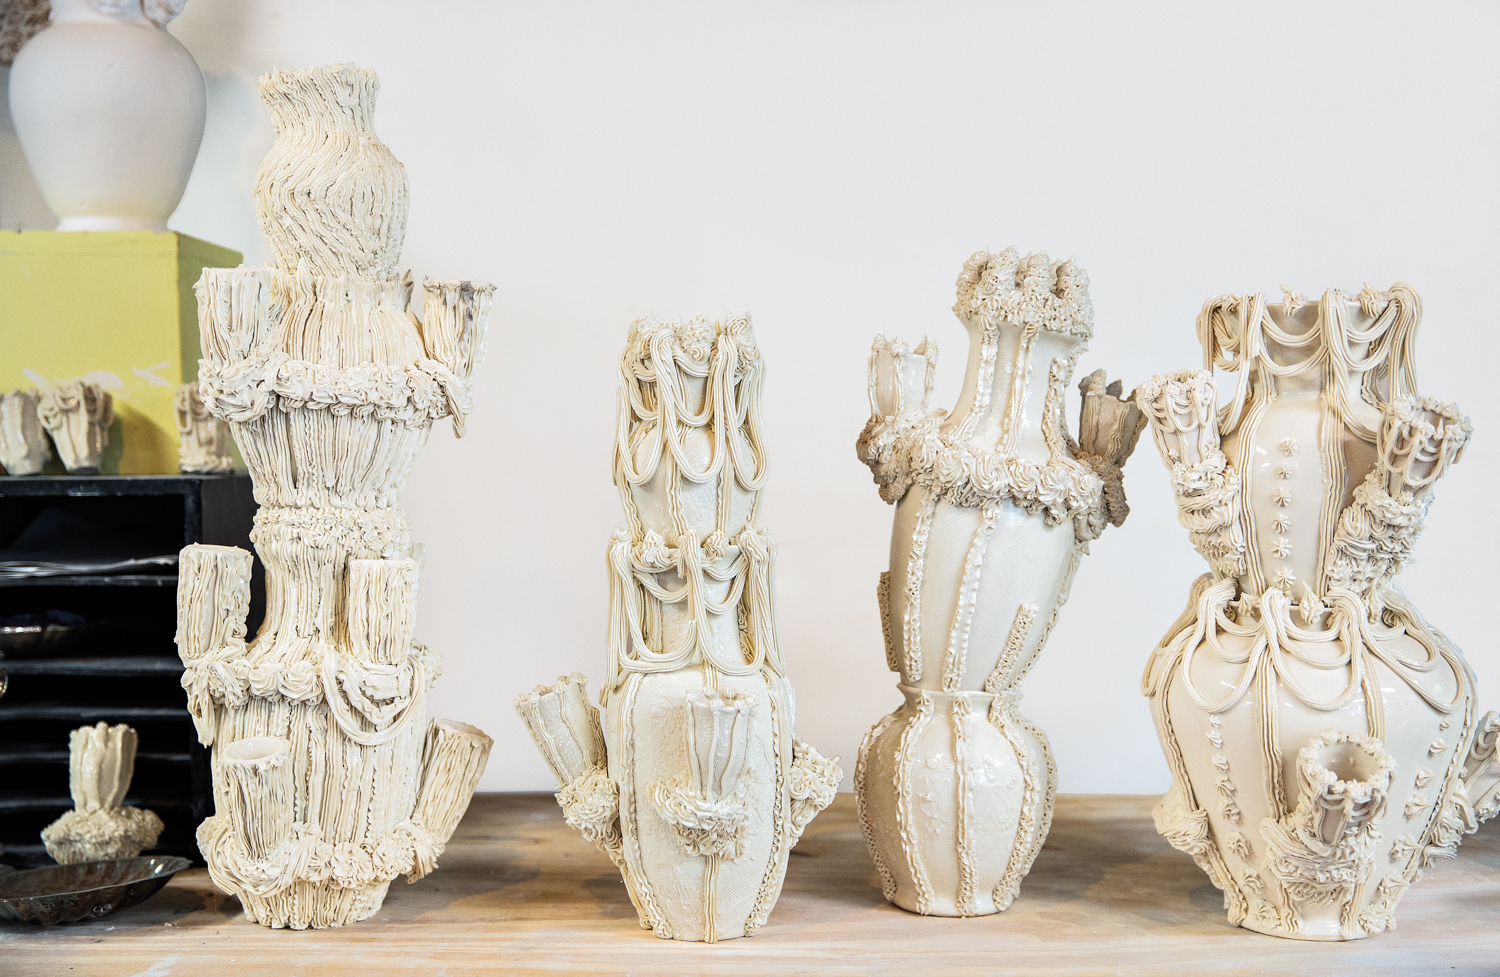 Lineup of off-kilter porcelain vessels with elaborate detailing